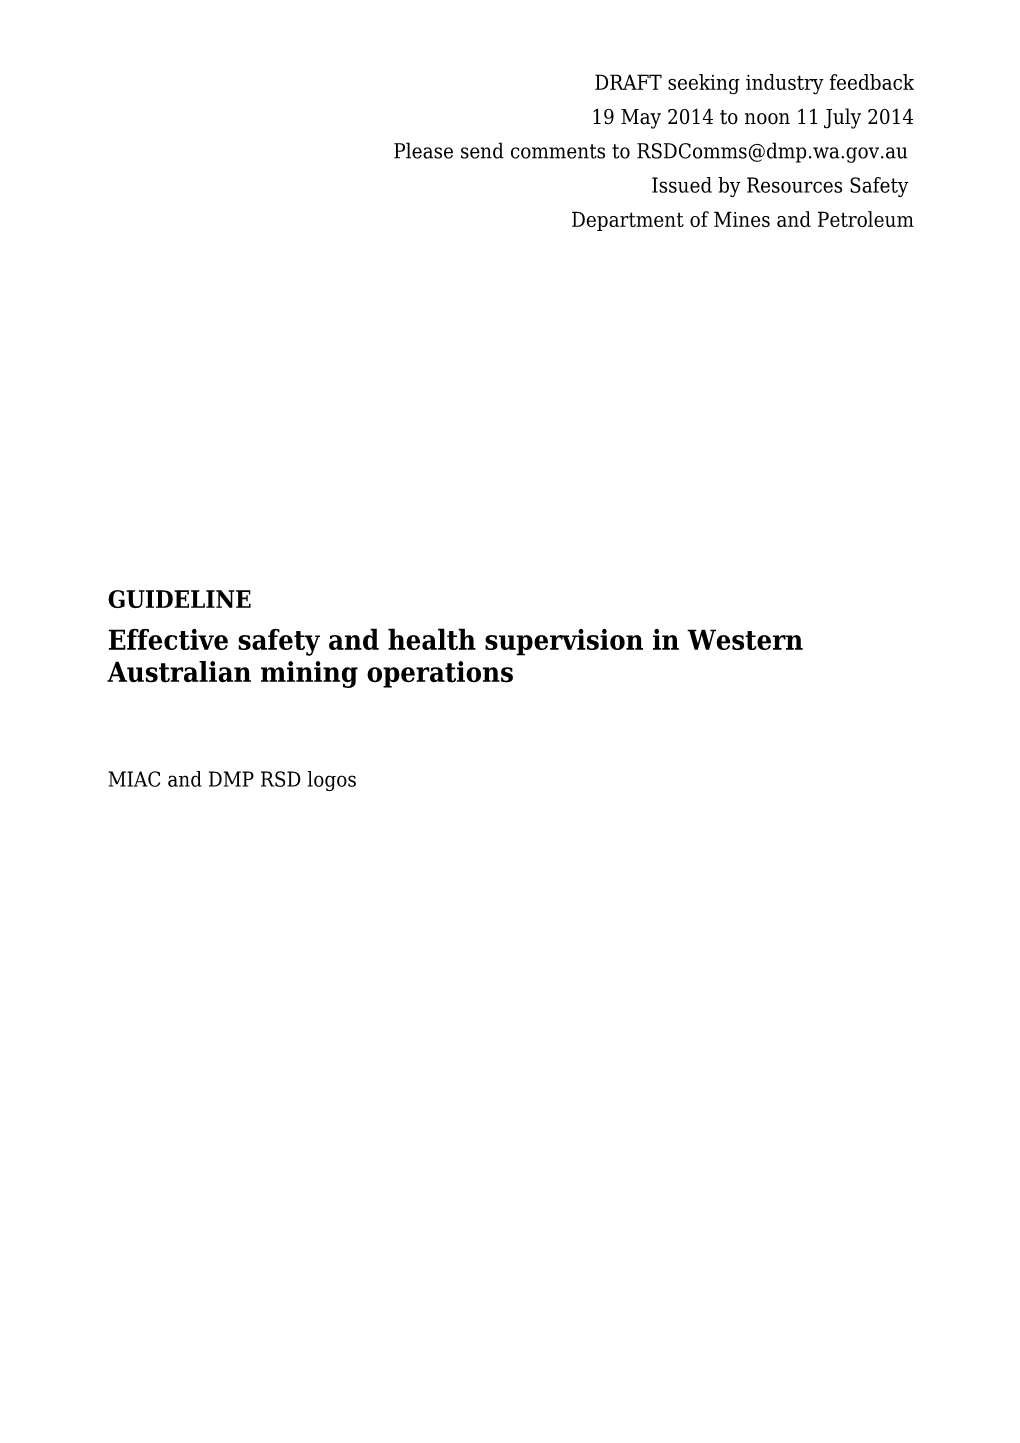 MS - Guideline - Effective Safety and Health Supervision in WA Mining Operations - Industry